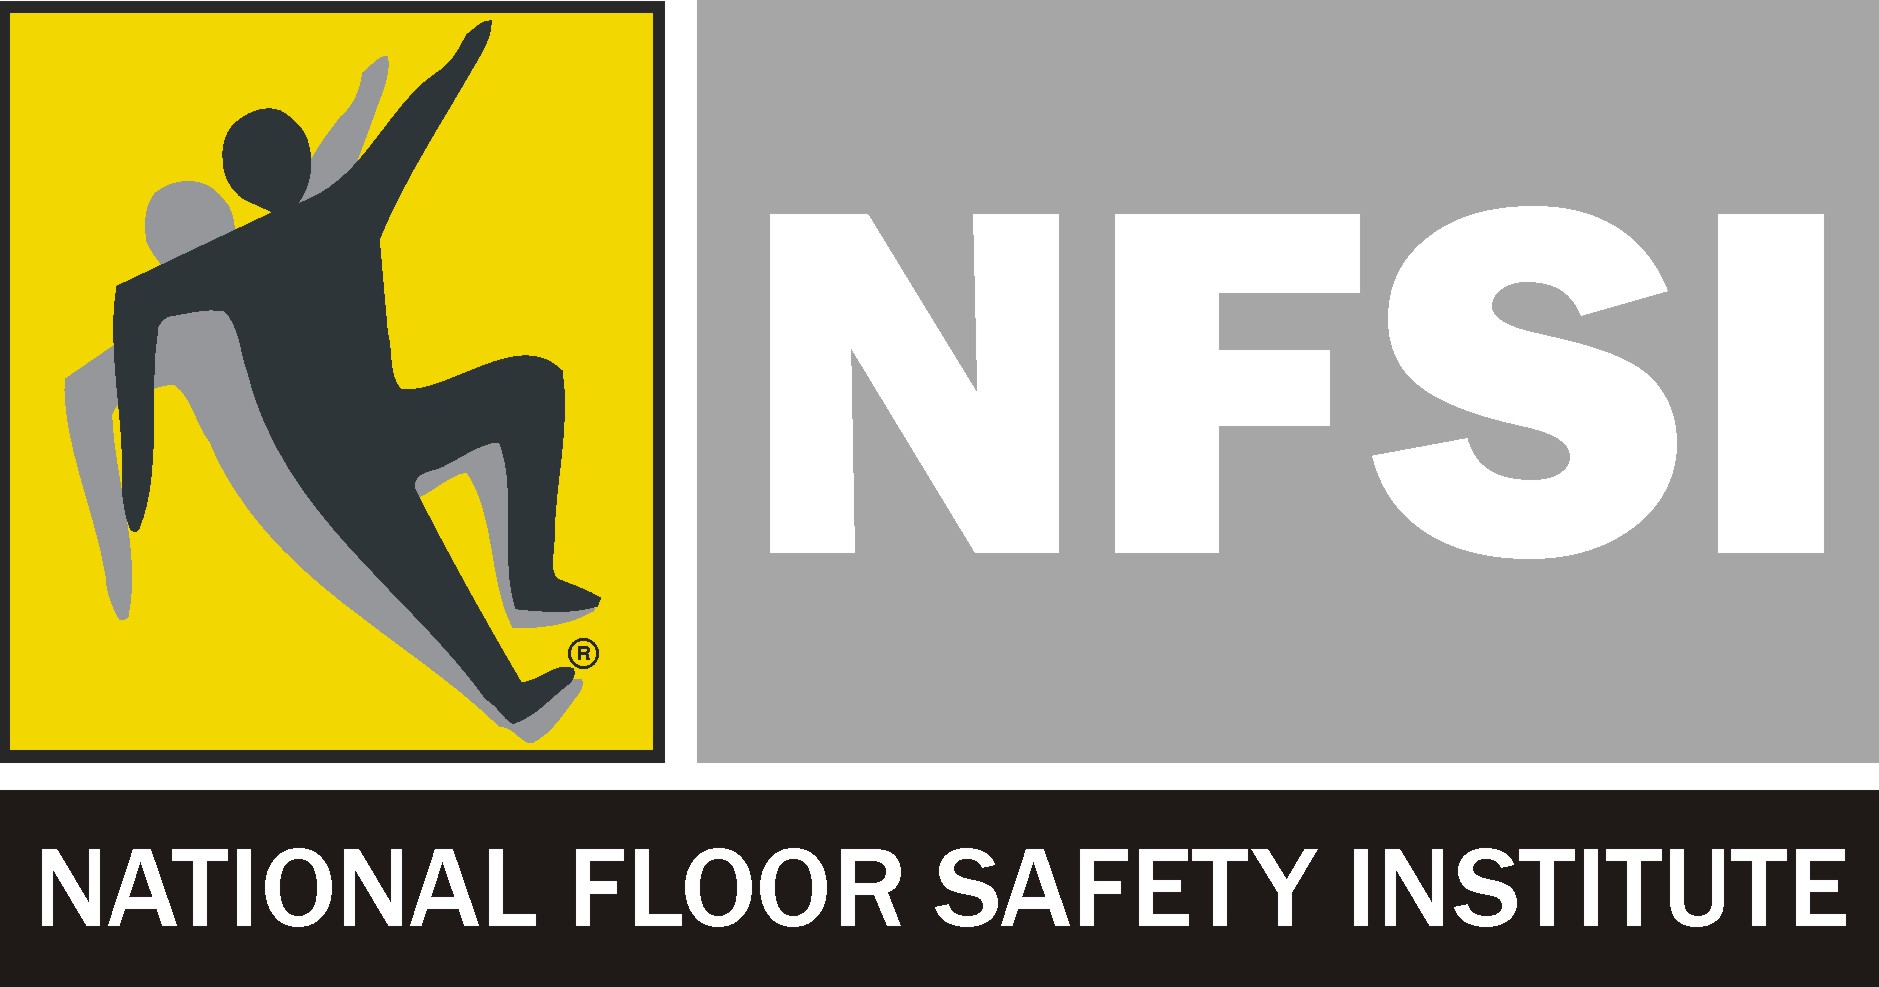 The National Floor Safety Institute (NFSI) Corporate Logo